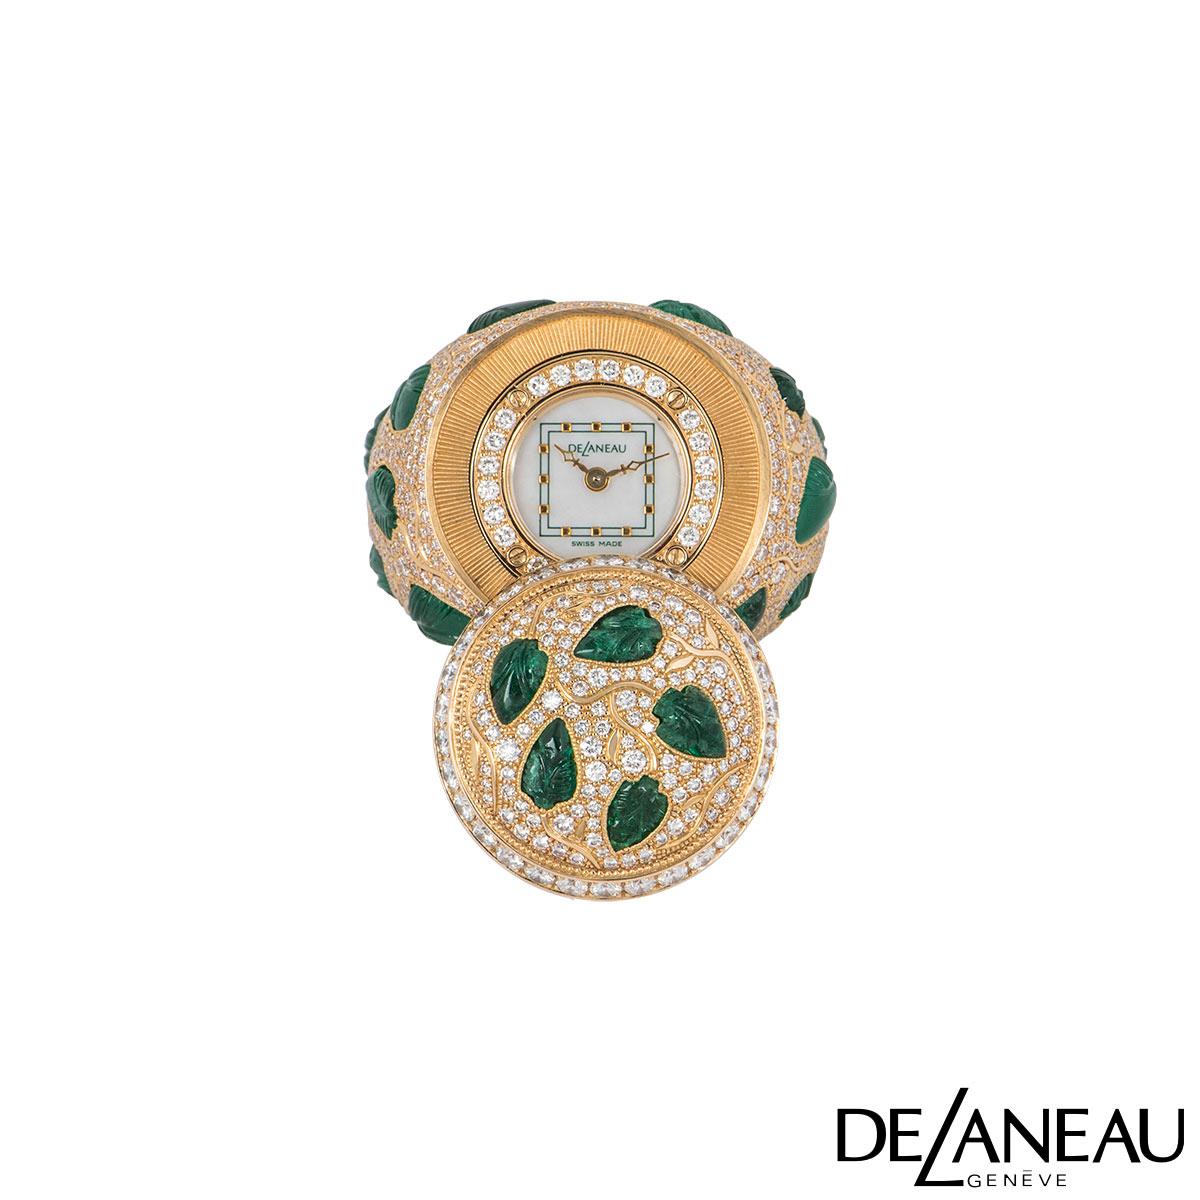 A stunning 18k rose gold ring watch by DeLanaeu from the Earth collection. The ring has a floral theme and is pave set with approximately 170 round brilliant cut diamonds alternating in sizes, with 18 emeralds carved in the shape of leaves set